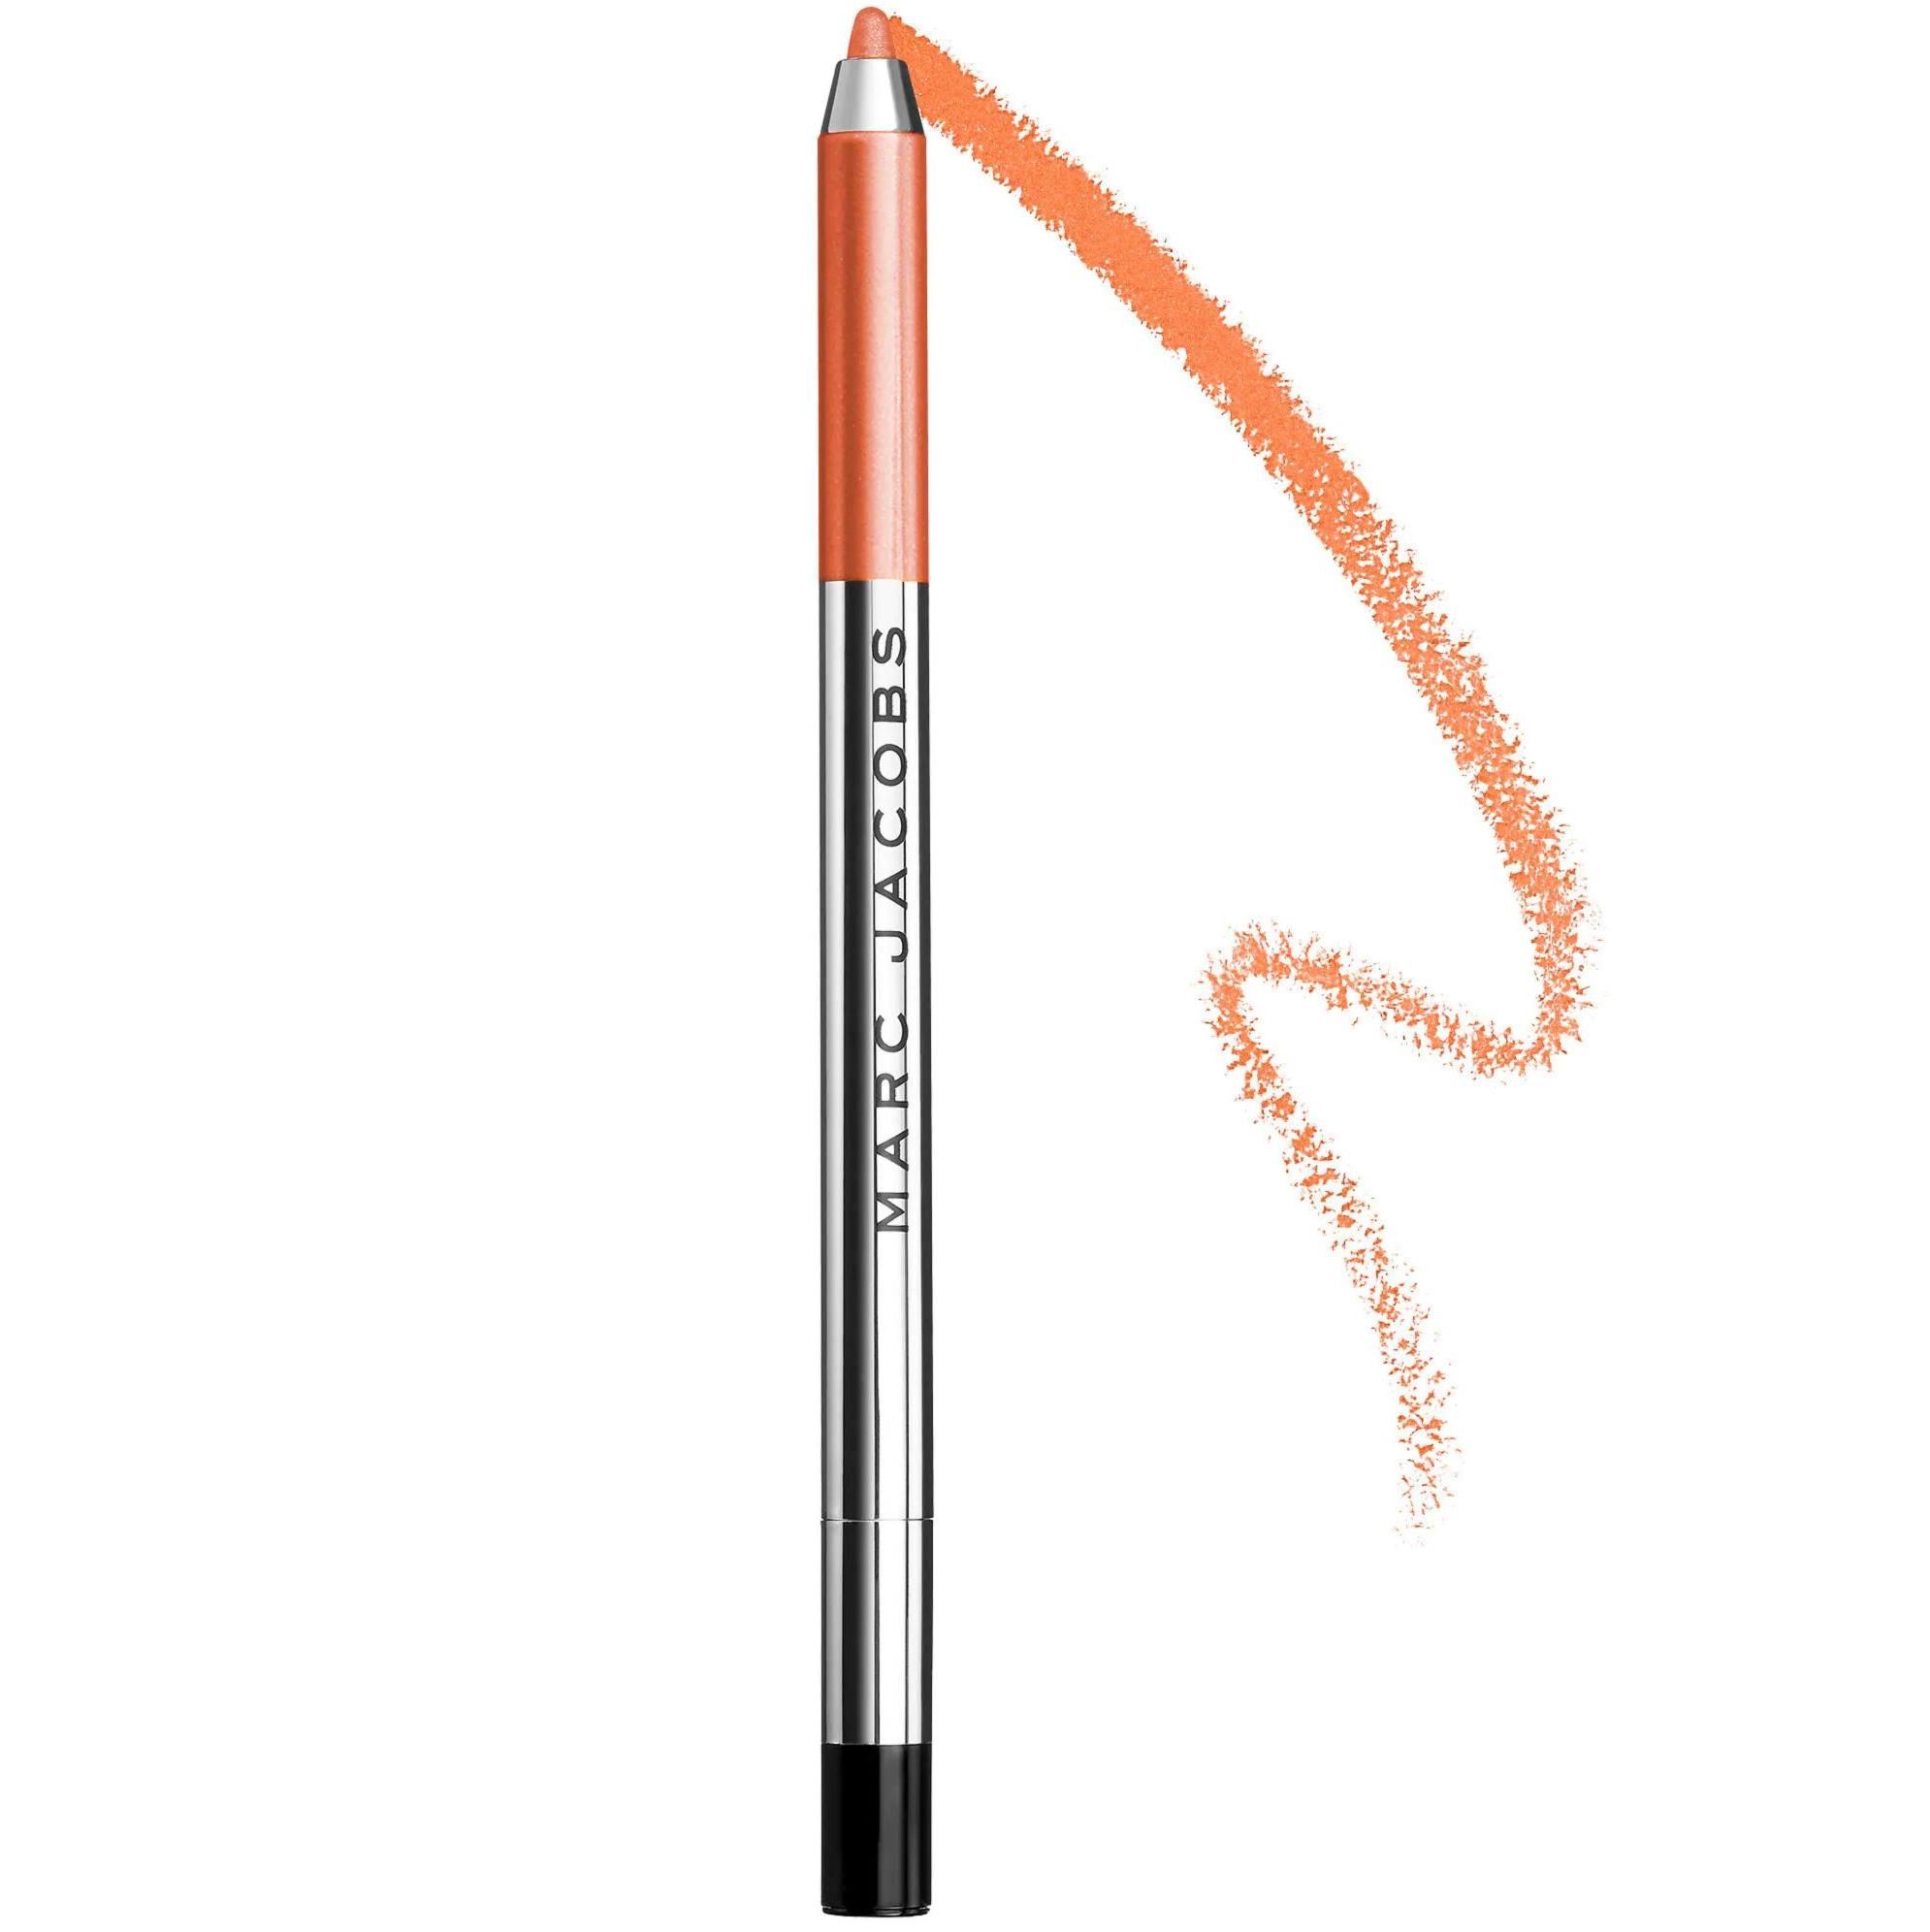 Orange Makeup Is The Summer Trend That’s Also Perfect For Fall